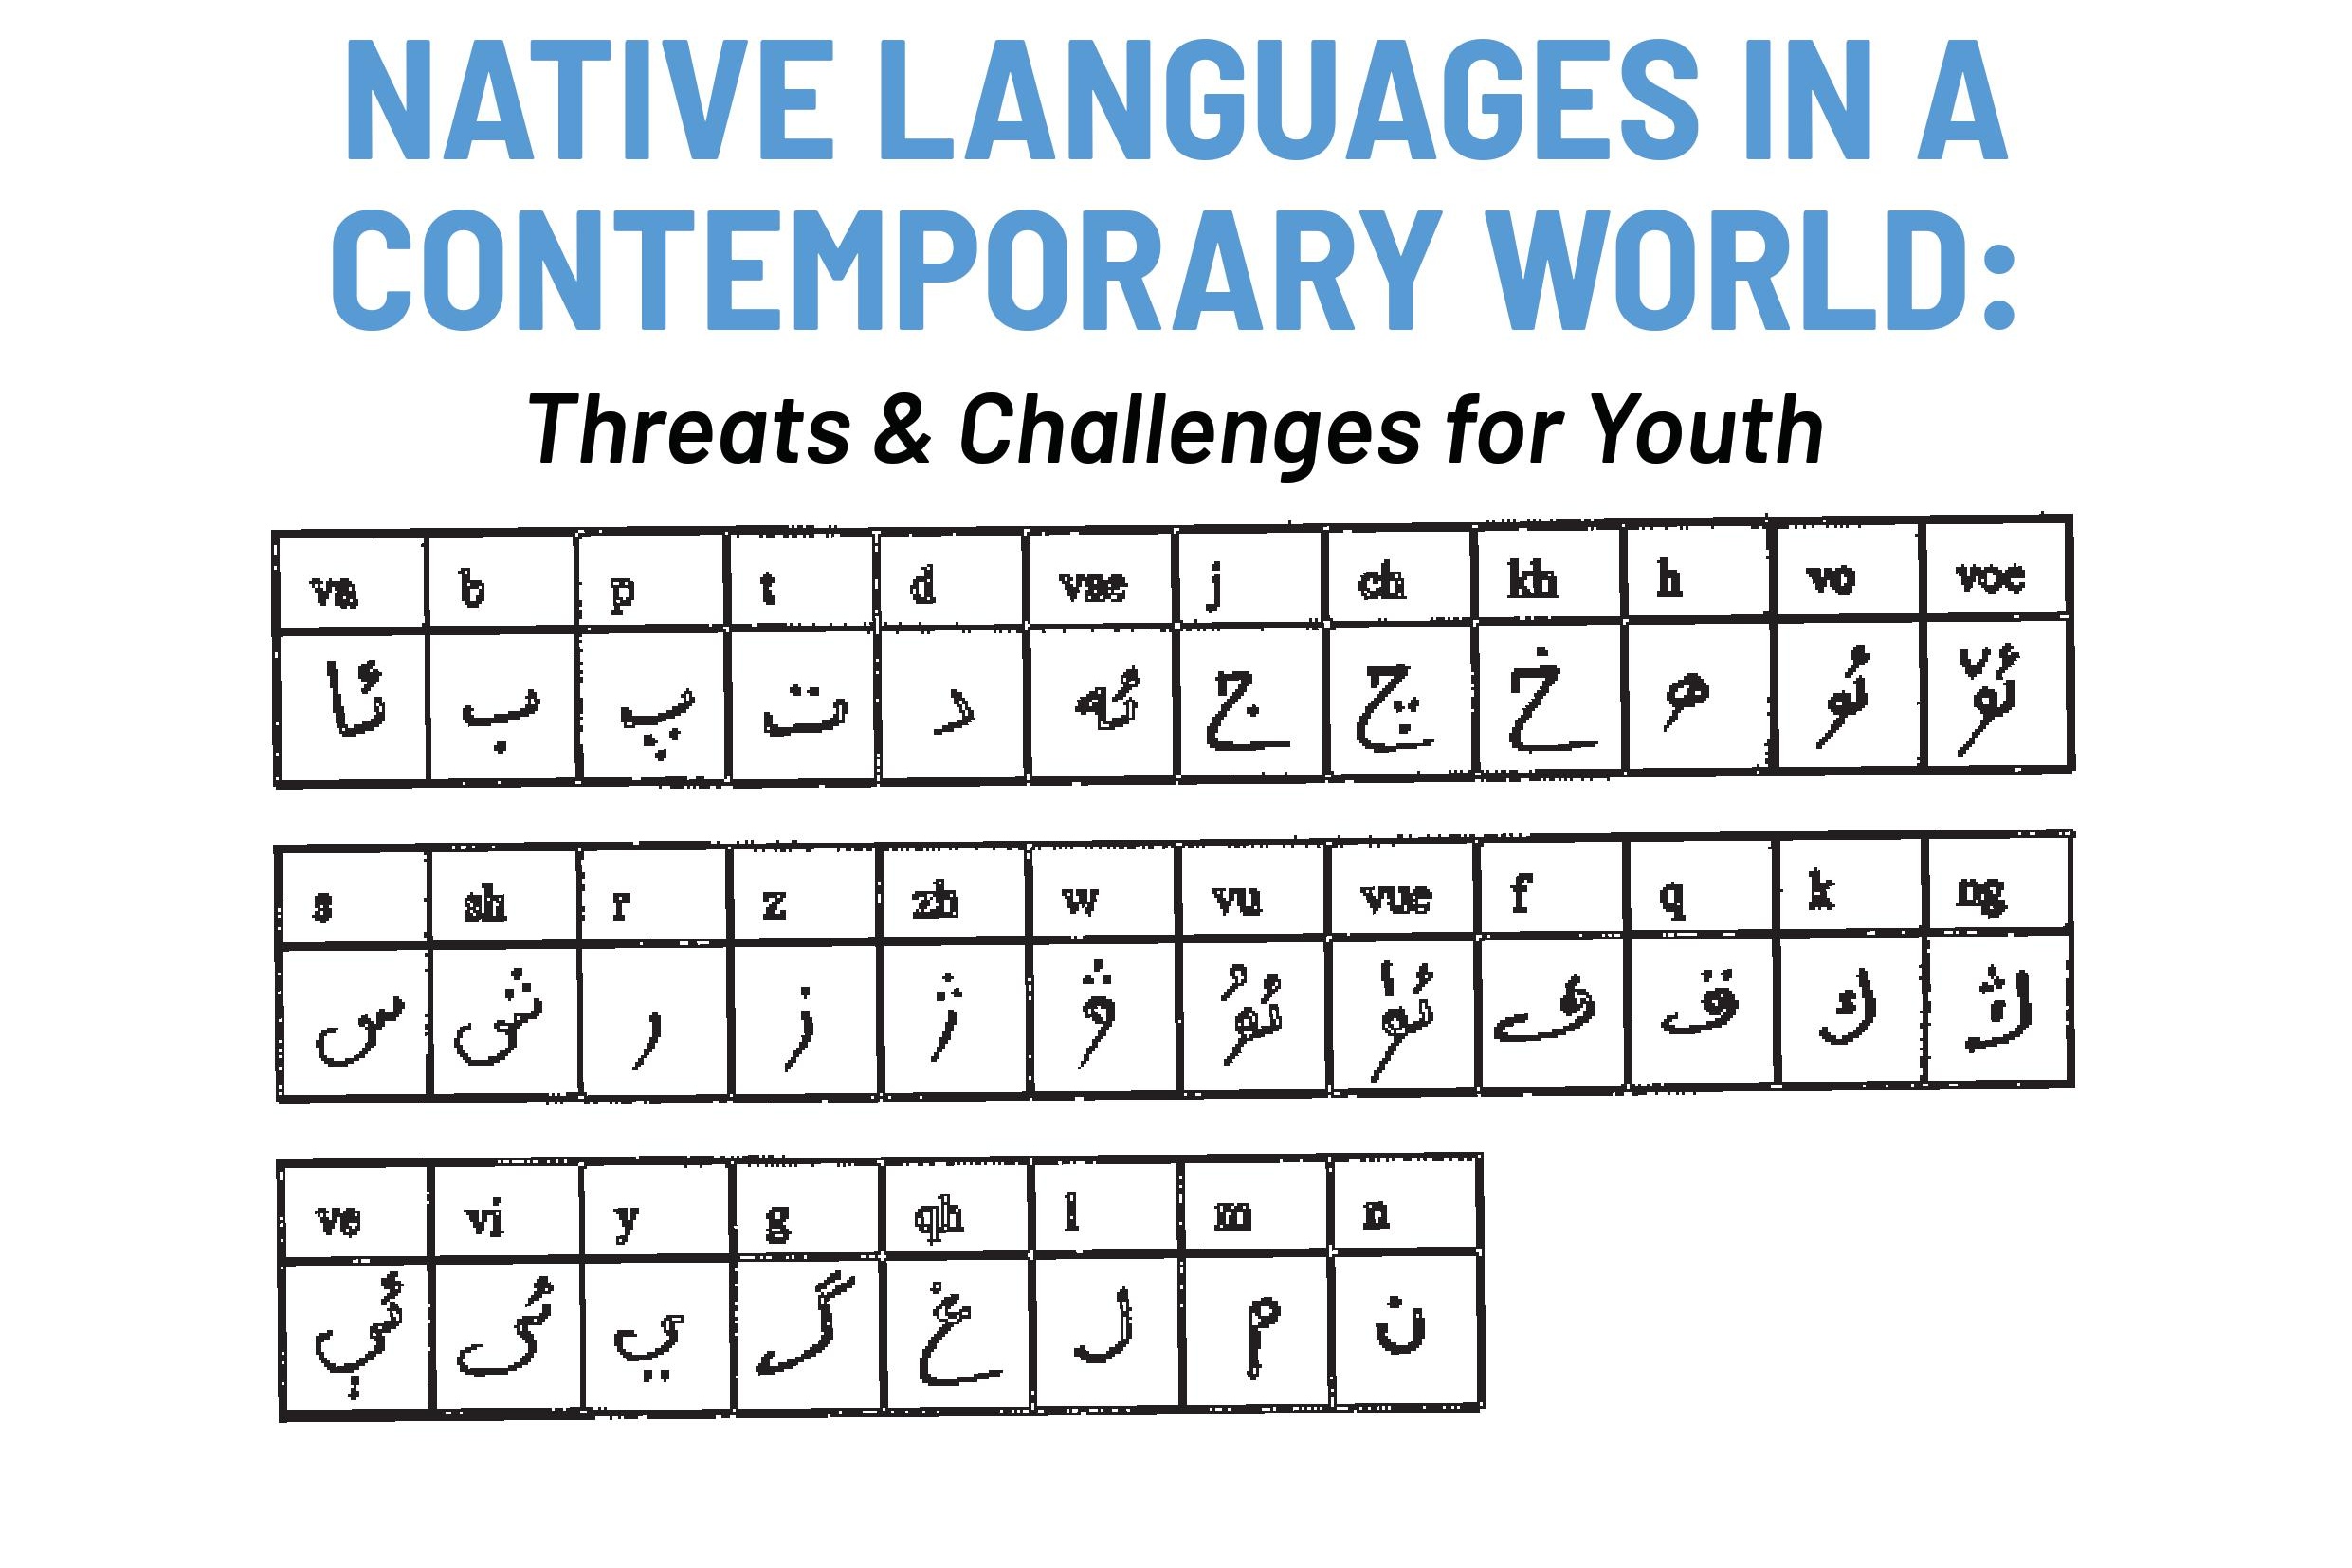 UN Minority Forum Side Event: ‘Native Languages in a Contemporary World: Threats and Challenges for Youth’